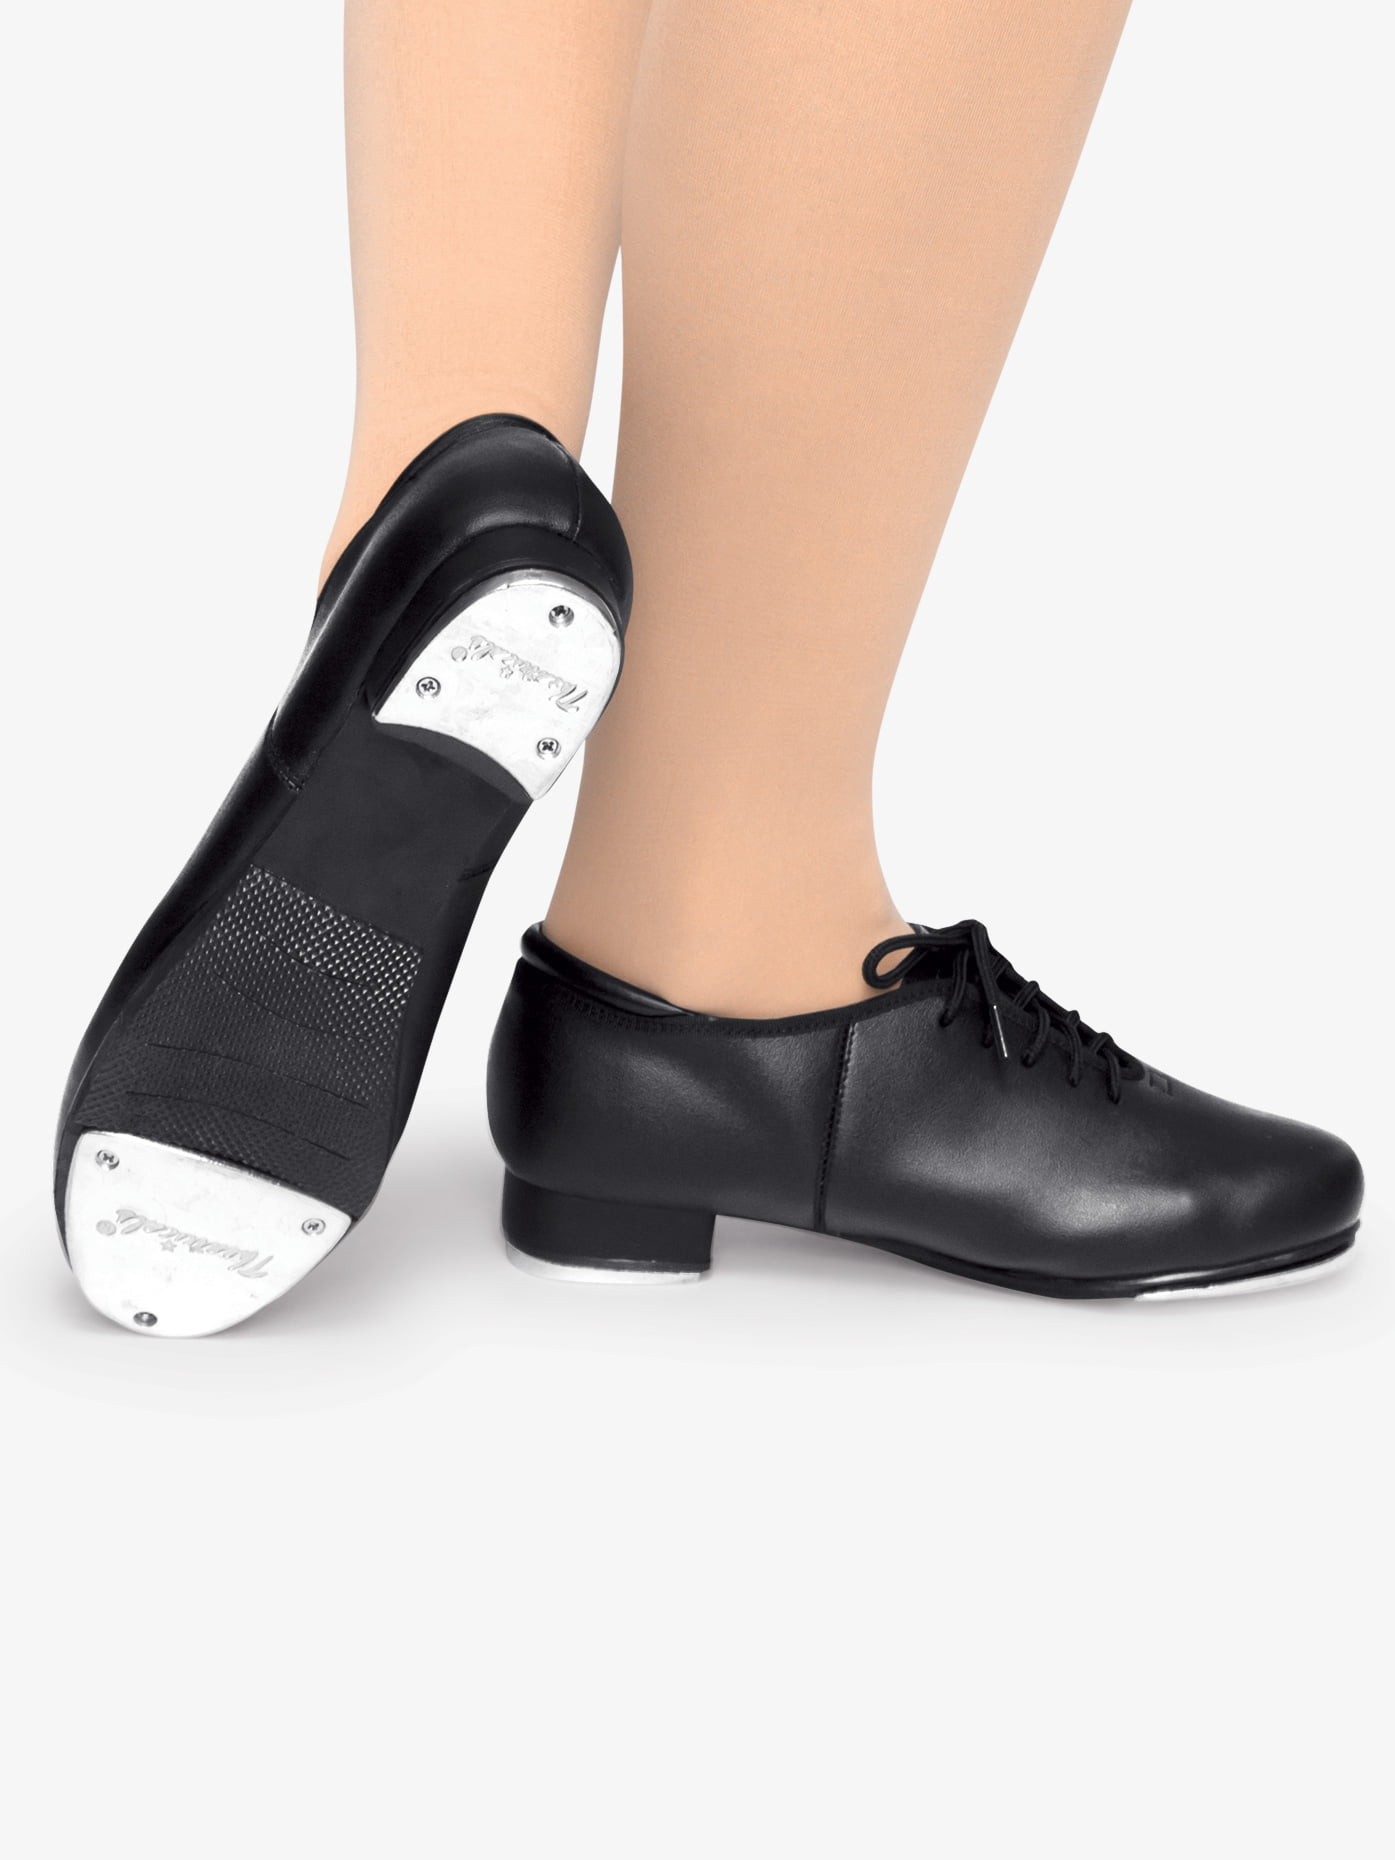 Roch Valley Oxford Jazz Tap Shoes Fitted Heel AND Toe Taps Unisex Child & Adult Sizes